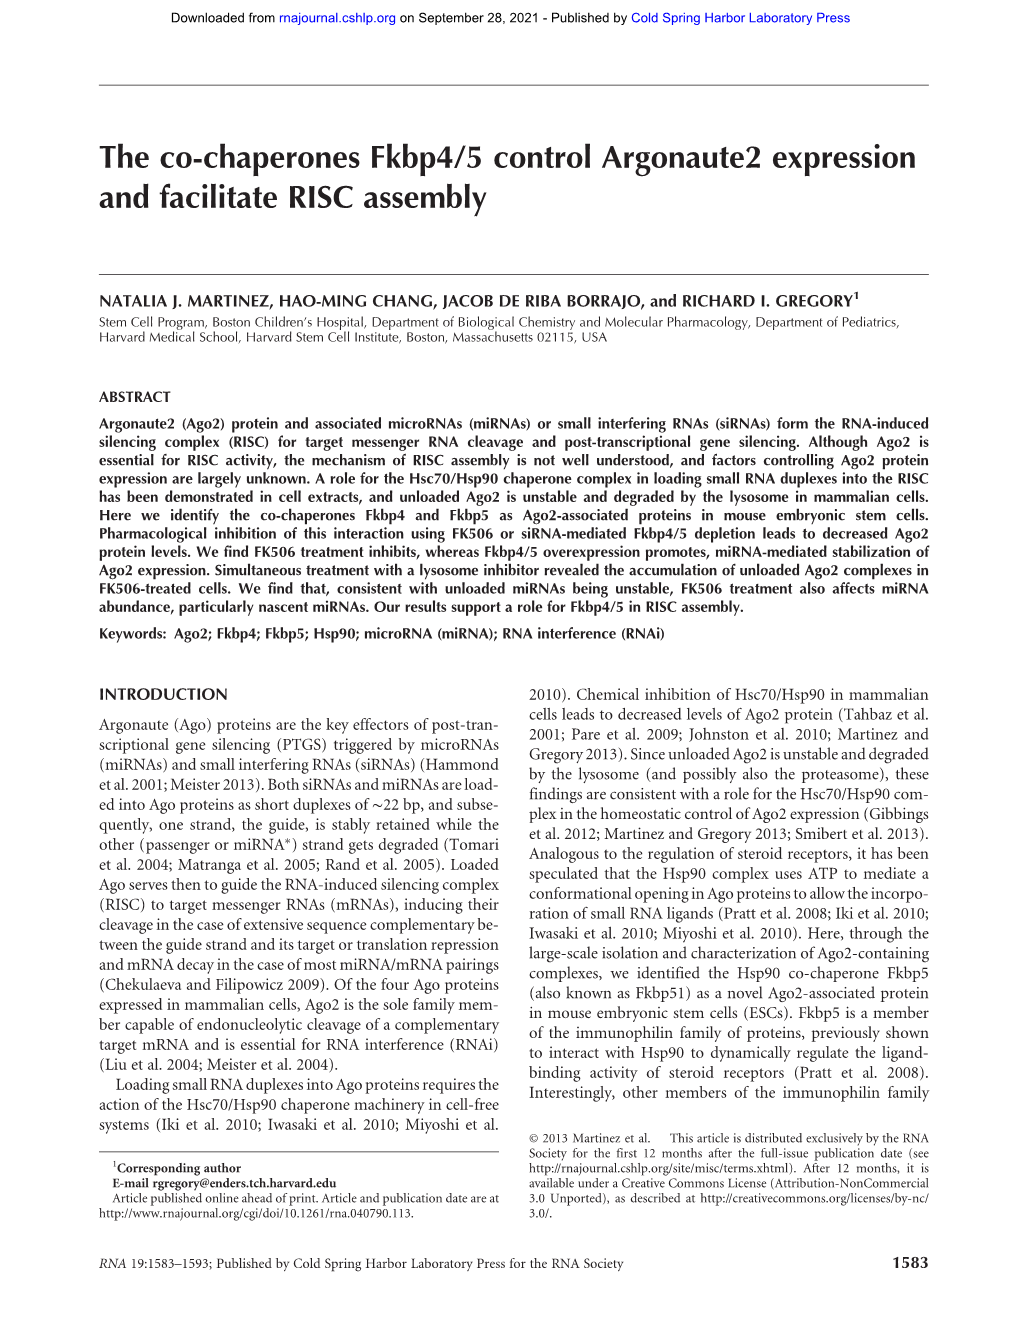 The Co-Chaperones Fkbp4/5 Control Argonaute2 Expression and Facilitate RISC Assembly